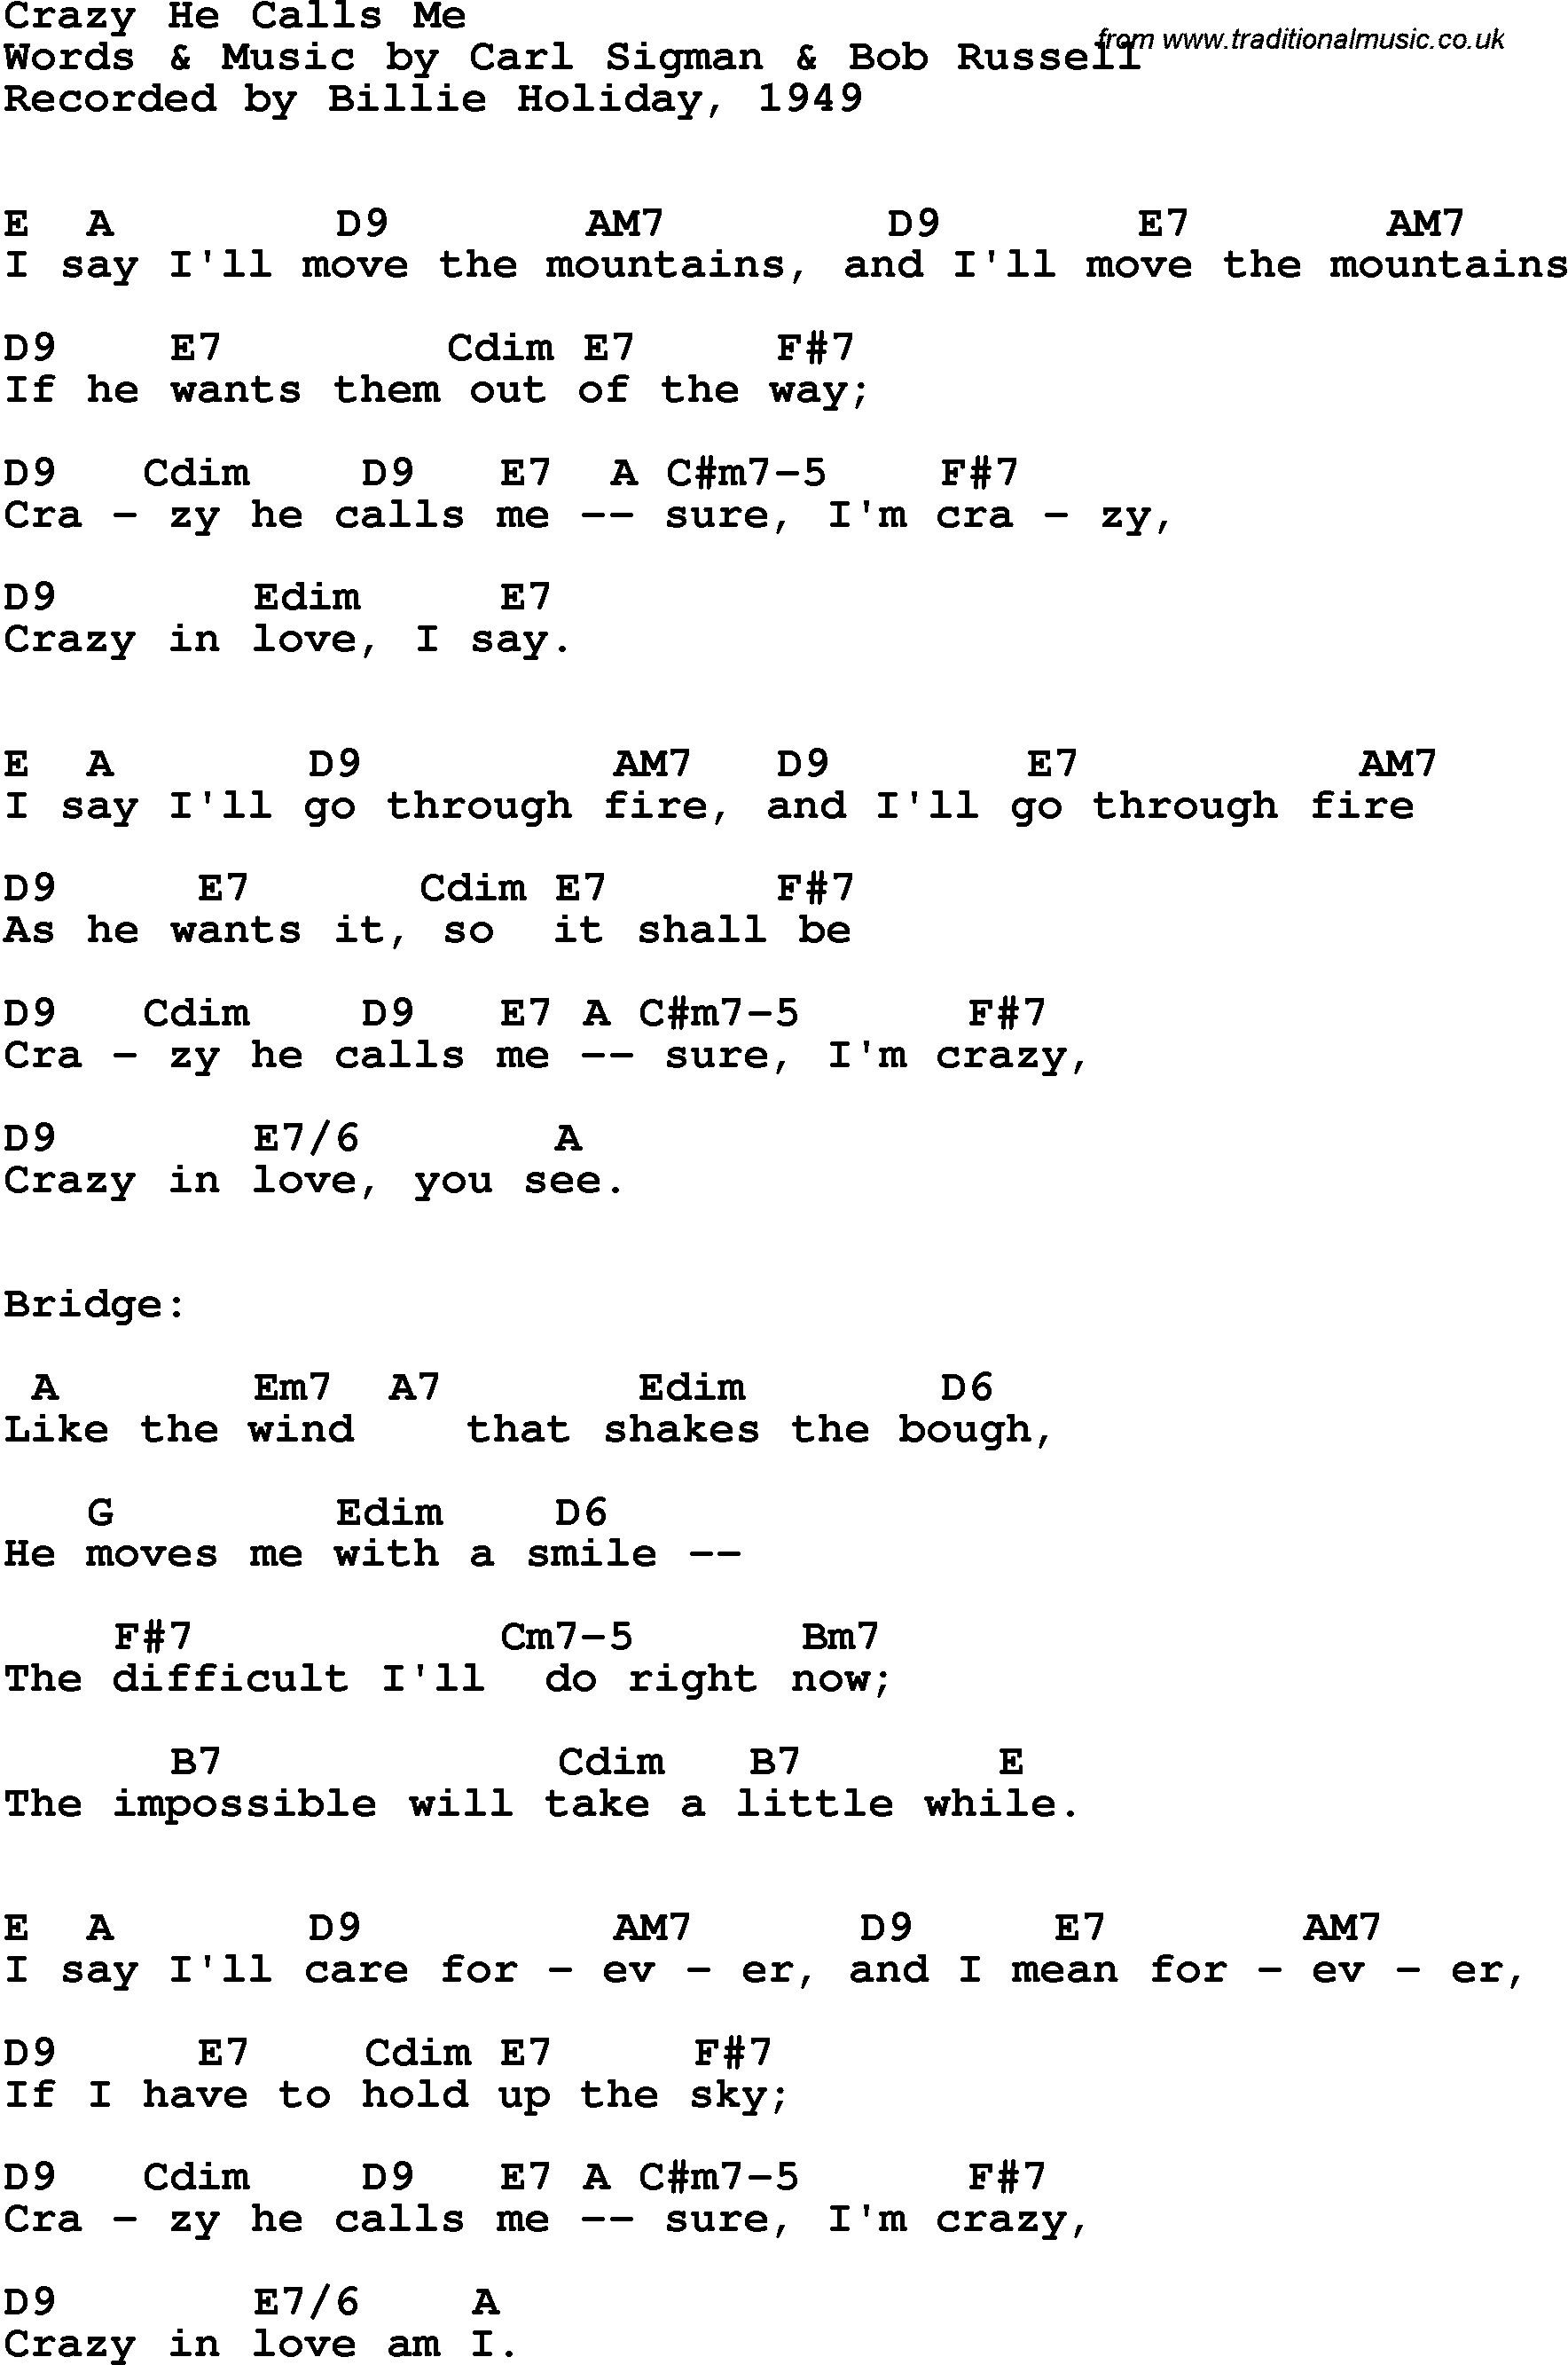 Song Lyrics with guitar chords for Crazy He Calls Me- Billie Holiday, 1949